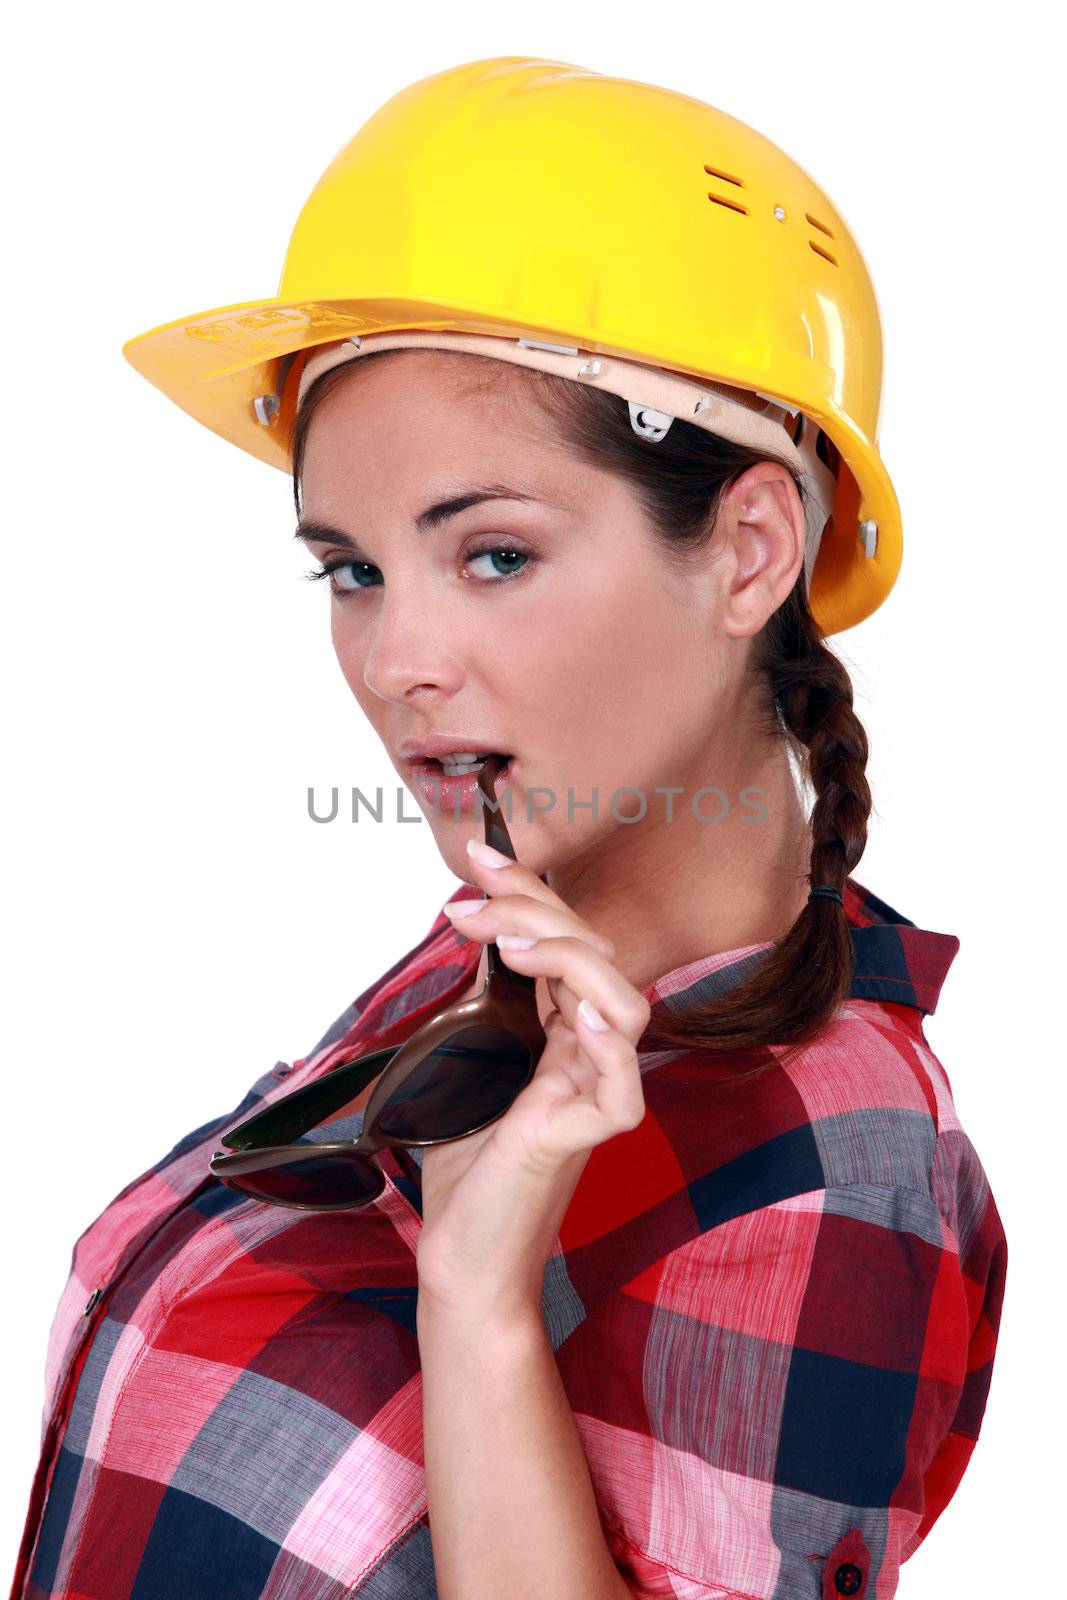 An alluring female construction worker with sunglasses.